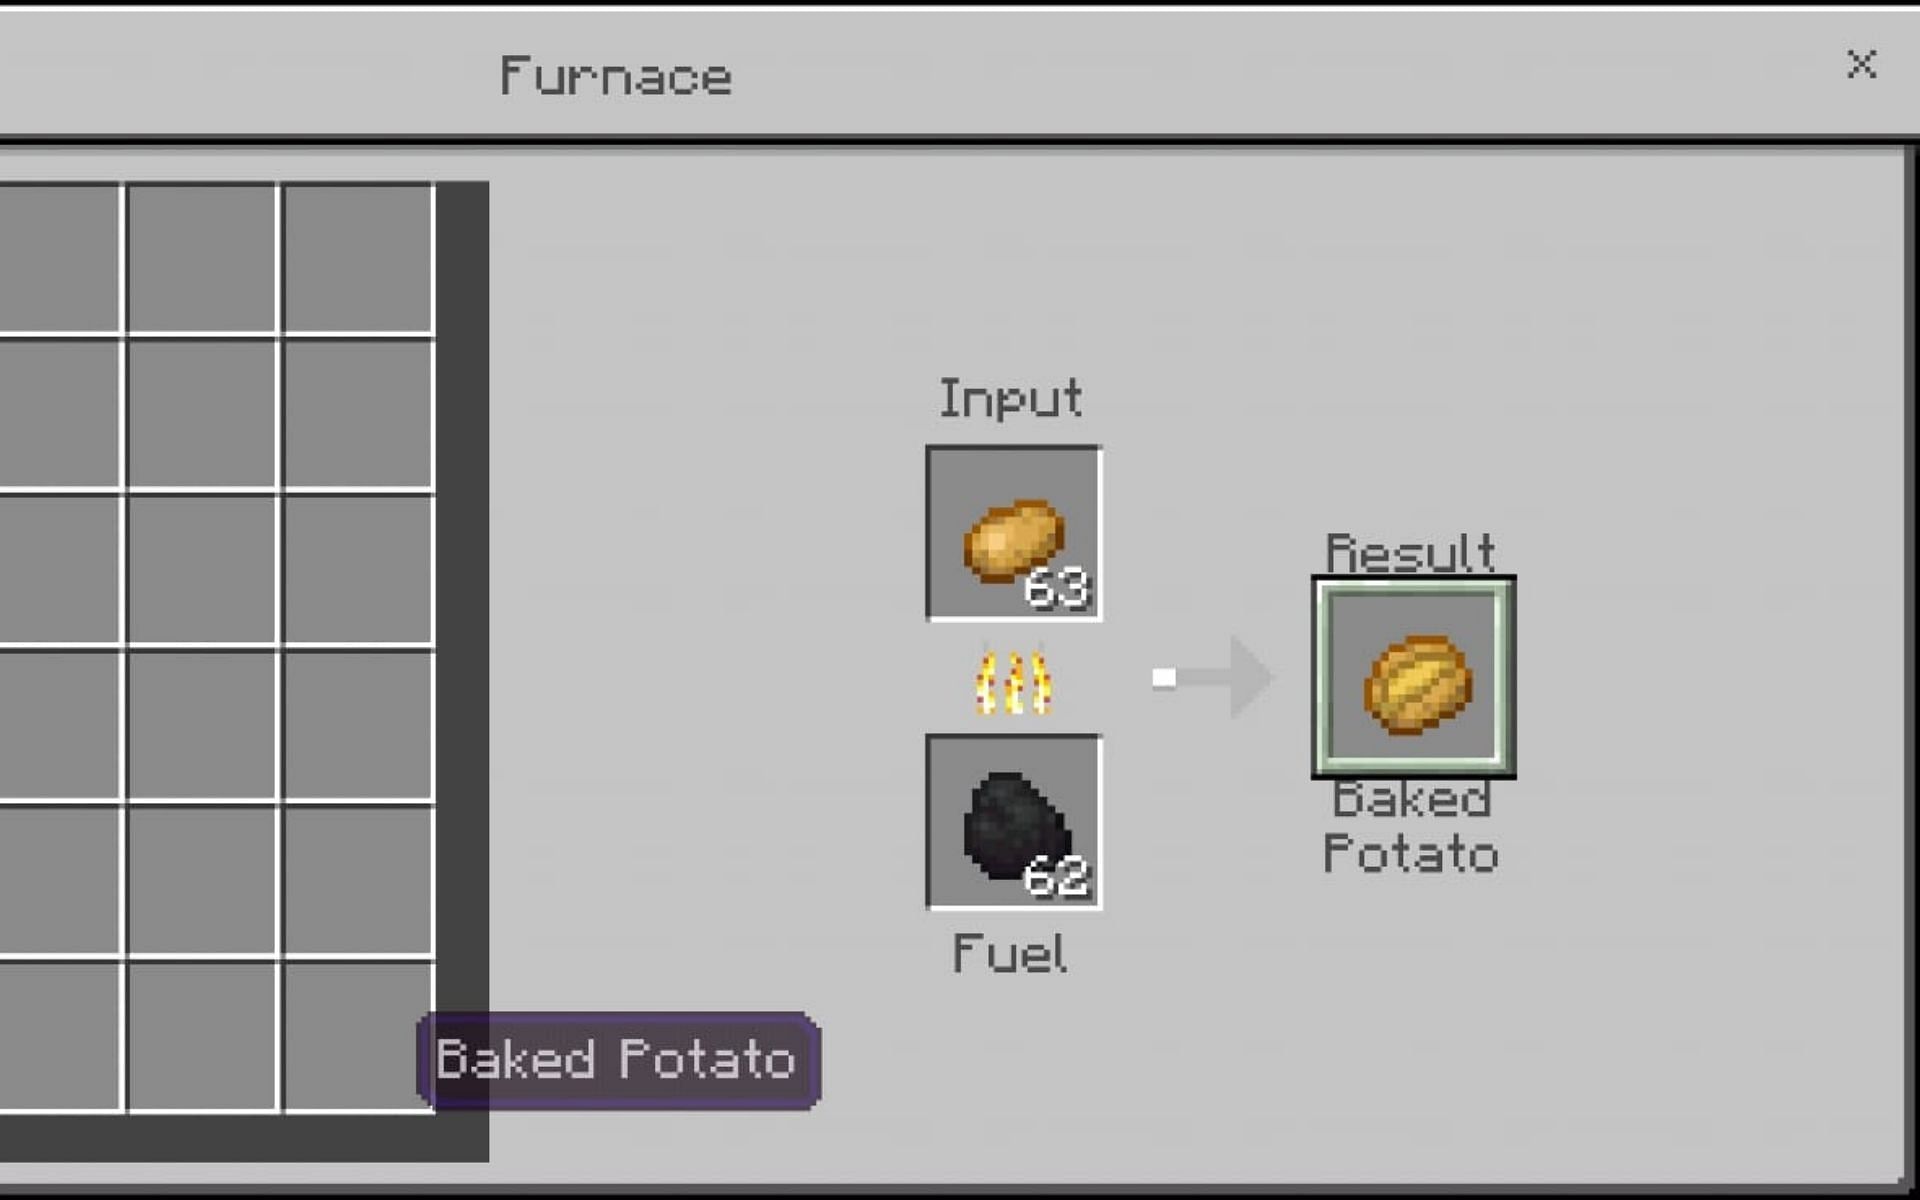 Cooking potatoes in furnace (Image via Minecraft)